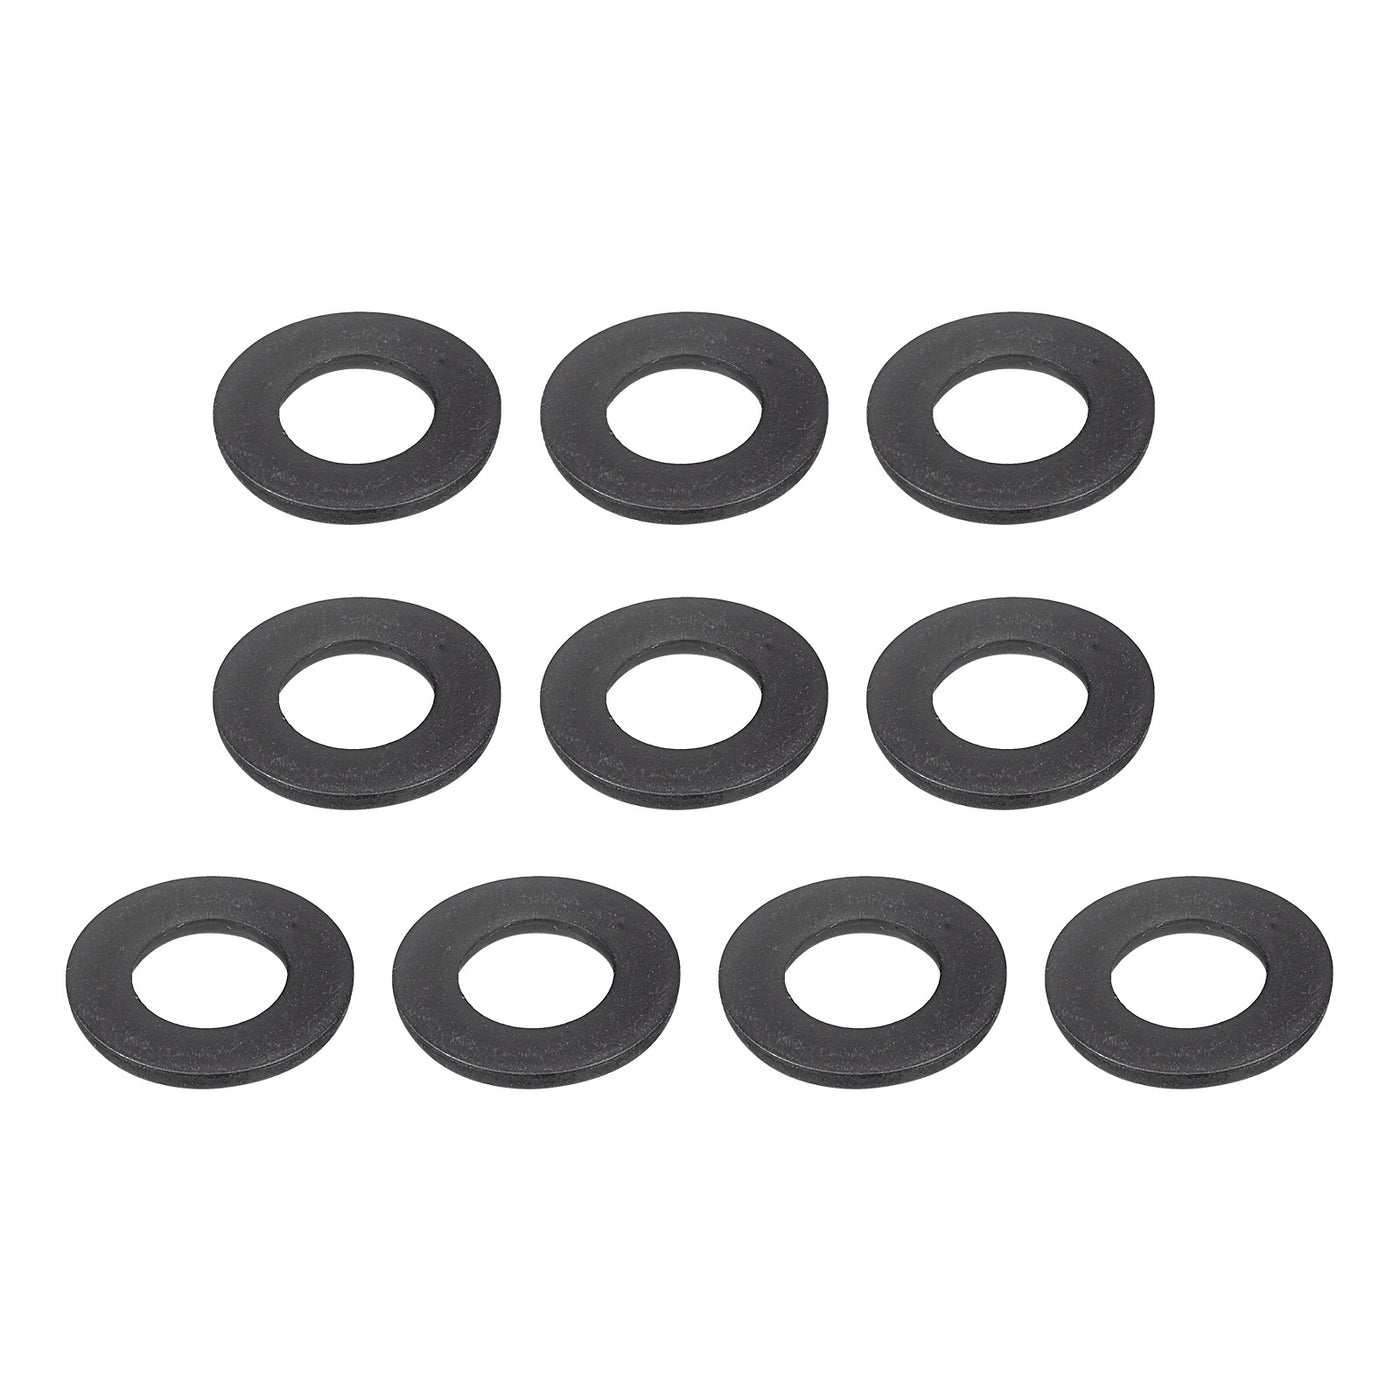 uxcell Uxcell M10 Carbon Steel Flat Washer 25pcs 10.5x20x2mm Grade 8.8 Alloy Steel Fasteners